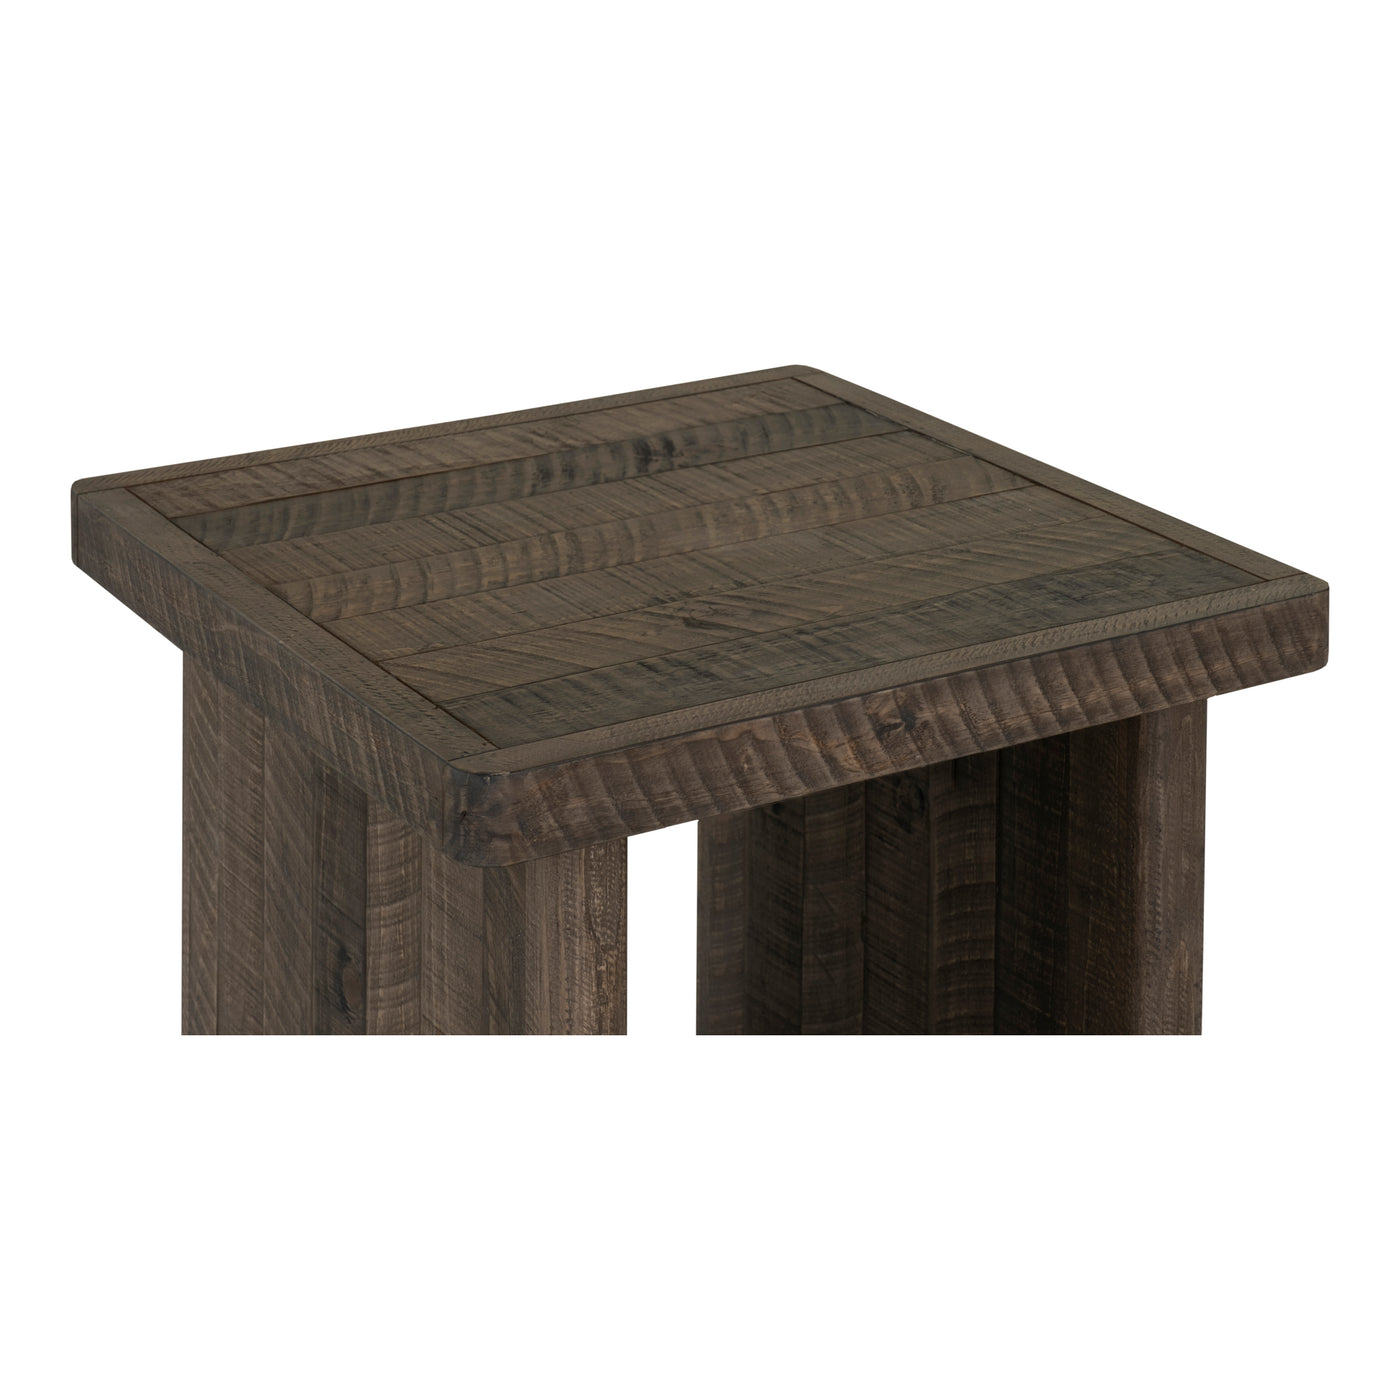 With a nod to the natural, bring earthy, on-trend rustic style to your living space with the Monterey end table. Just the ...